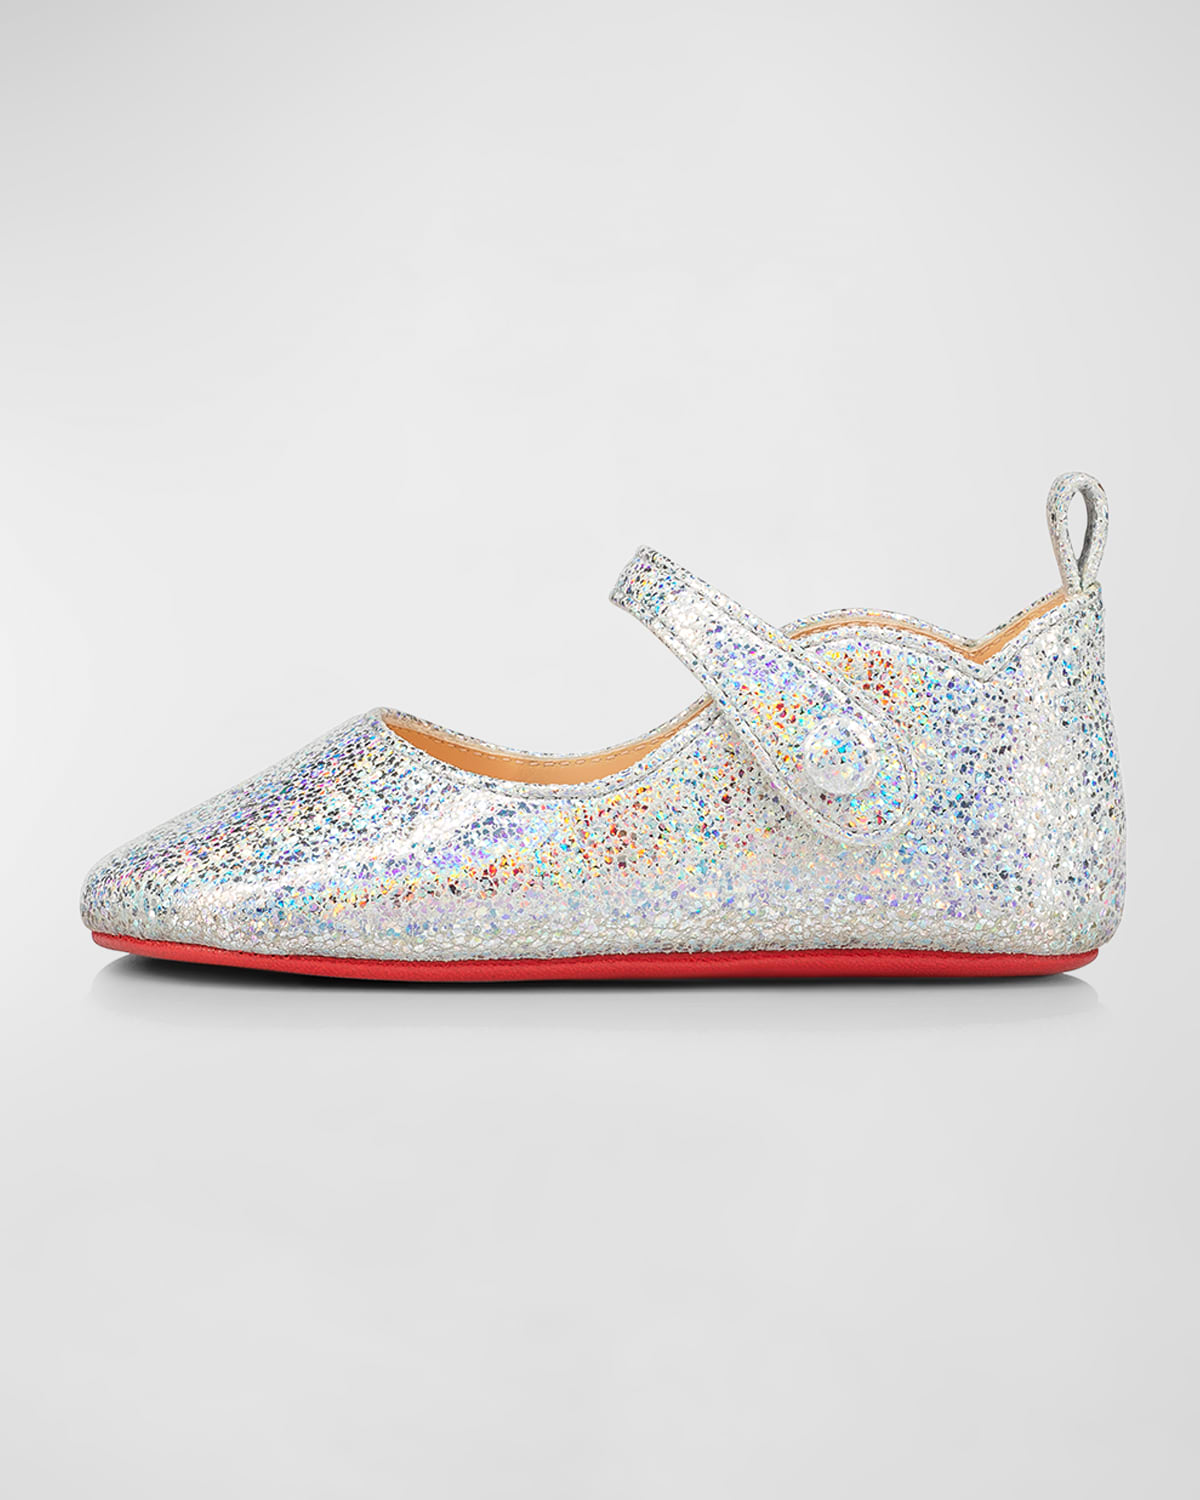 Christian Louboutin Kids' Girl's Love Chick Sparkle Leather Ballerina Flats, Baby In White Ab